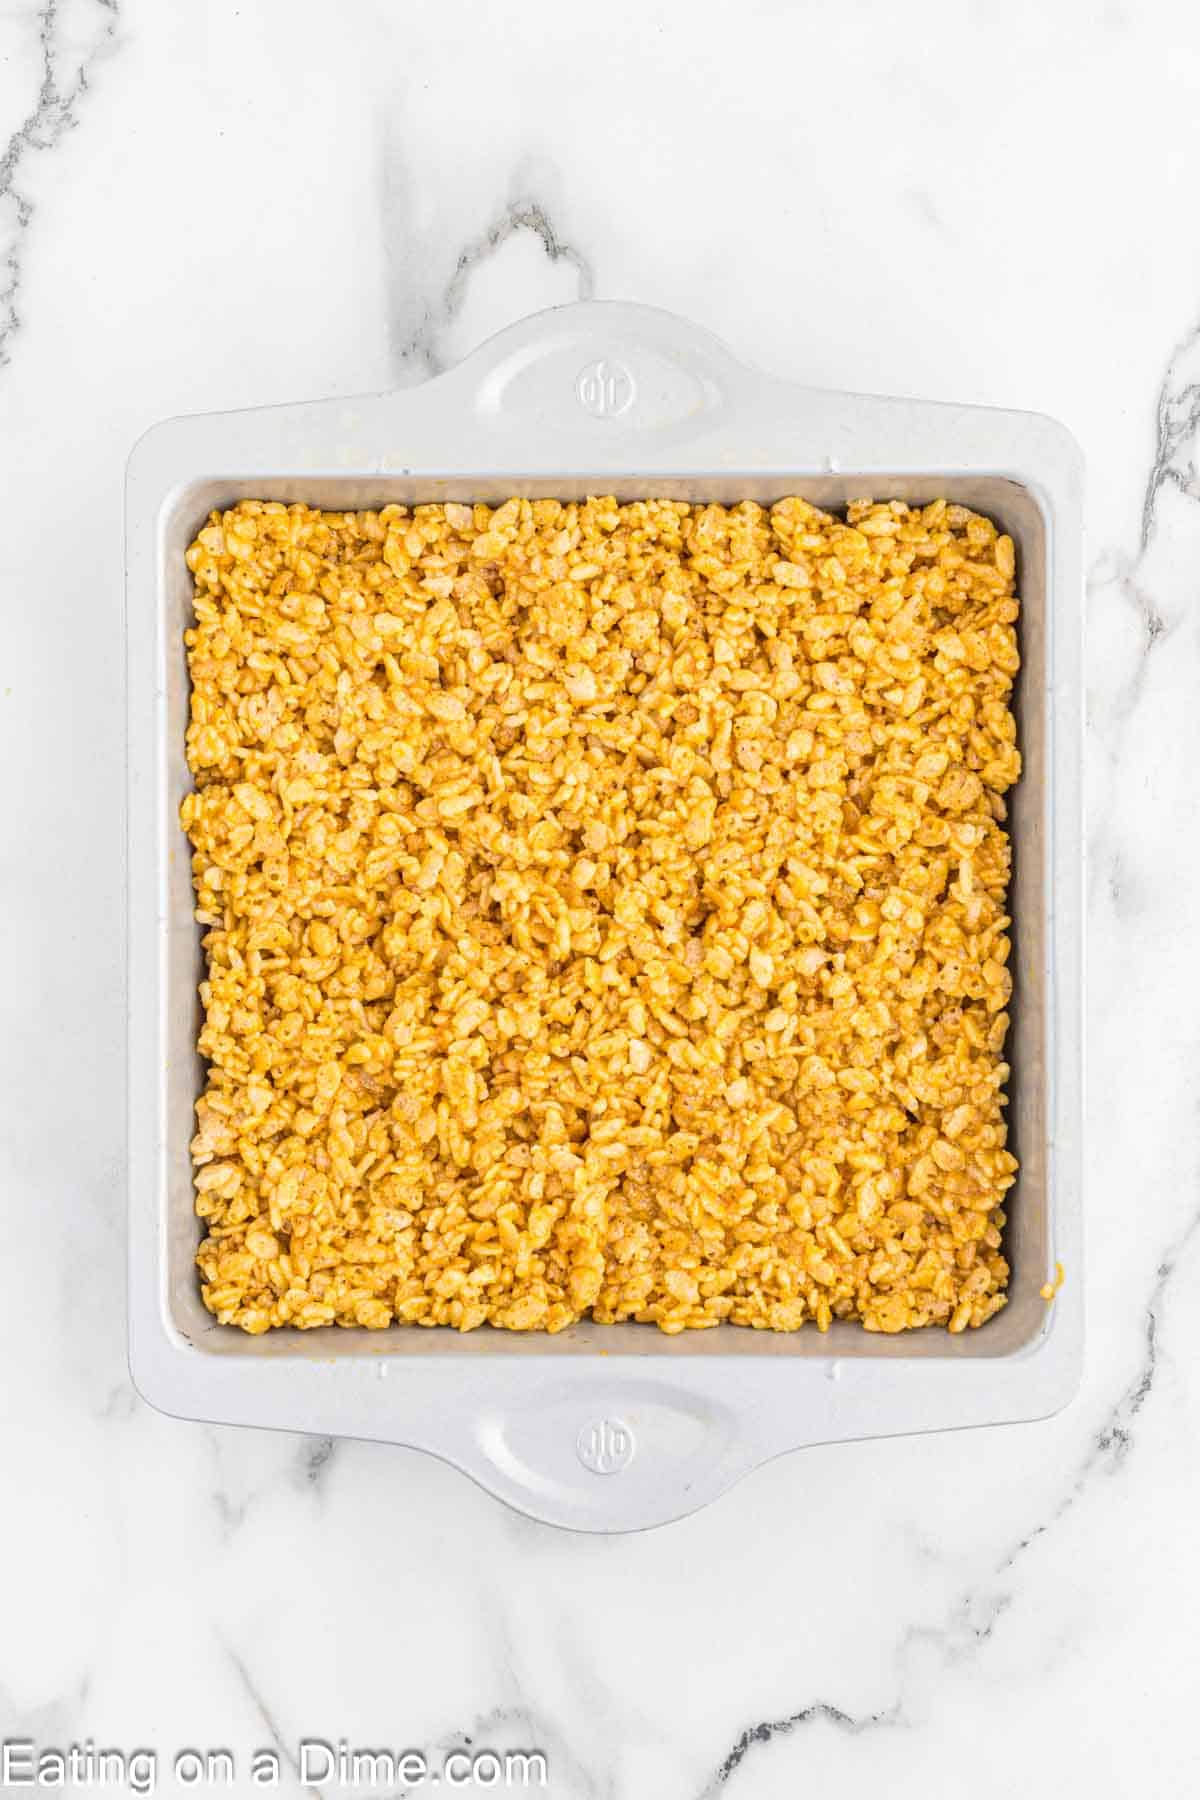 A square baking dish filled with golden brown pumpkin Rice Krispie treats rests on a marble countertop. The crispy, marshmallow-coated cereal squares, infused with a hint of pumpkin spice, fill the entire dish, ready to be cut and served.